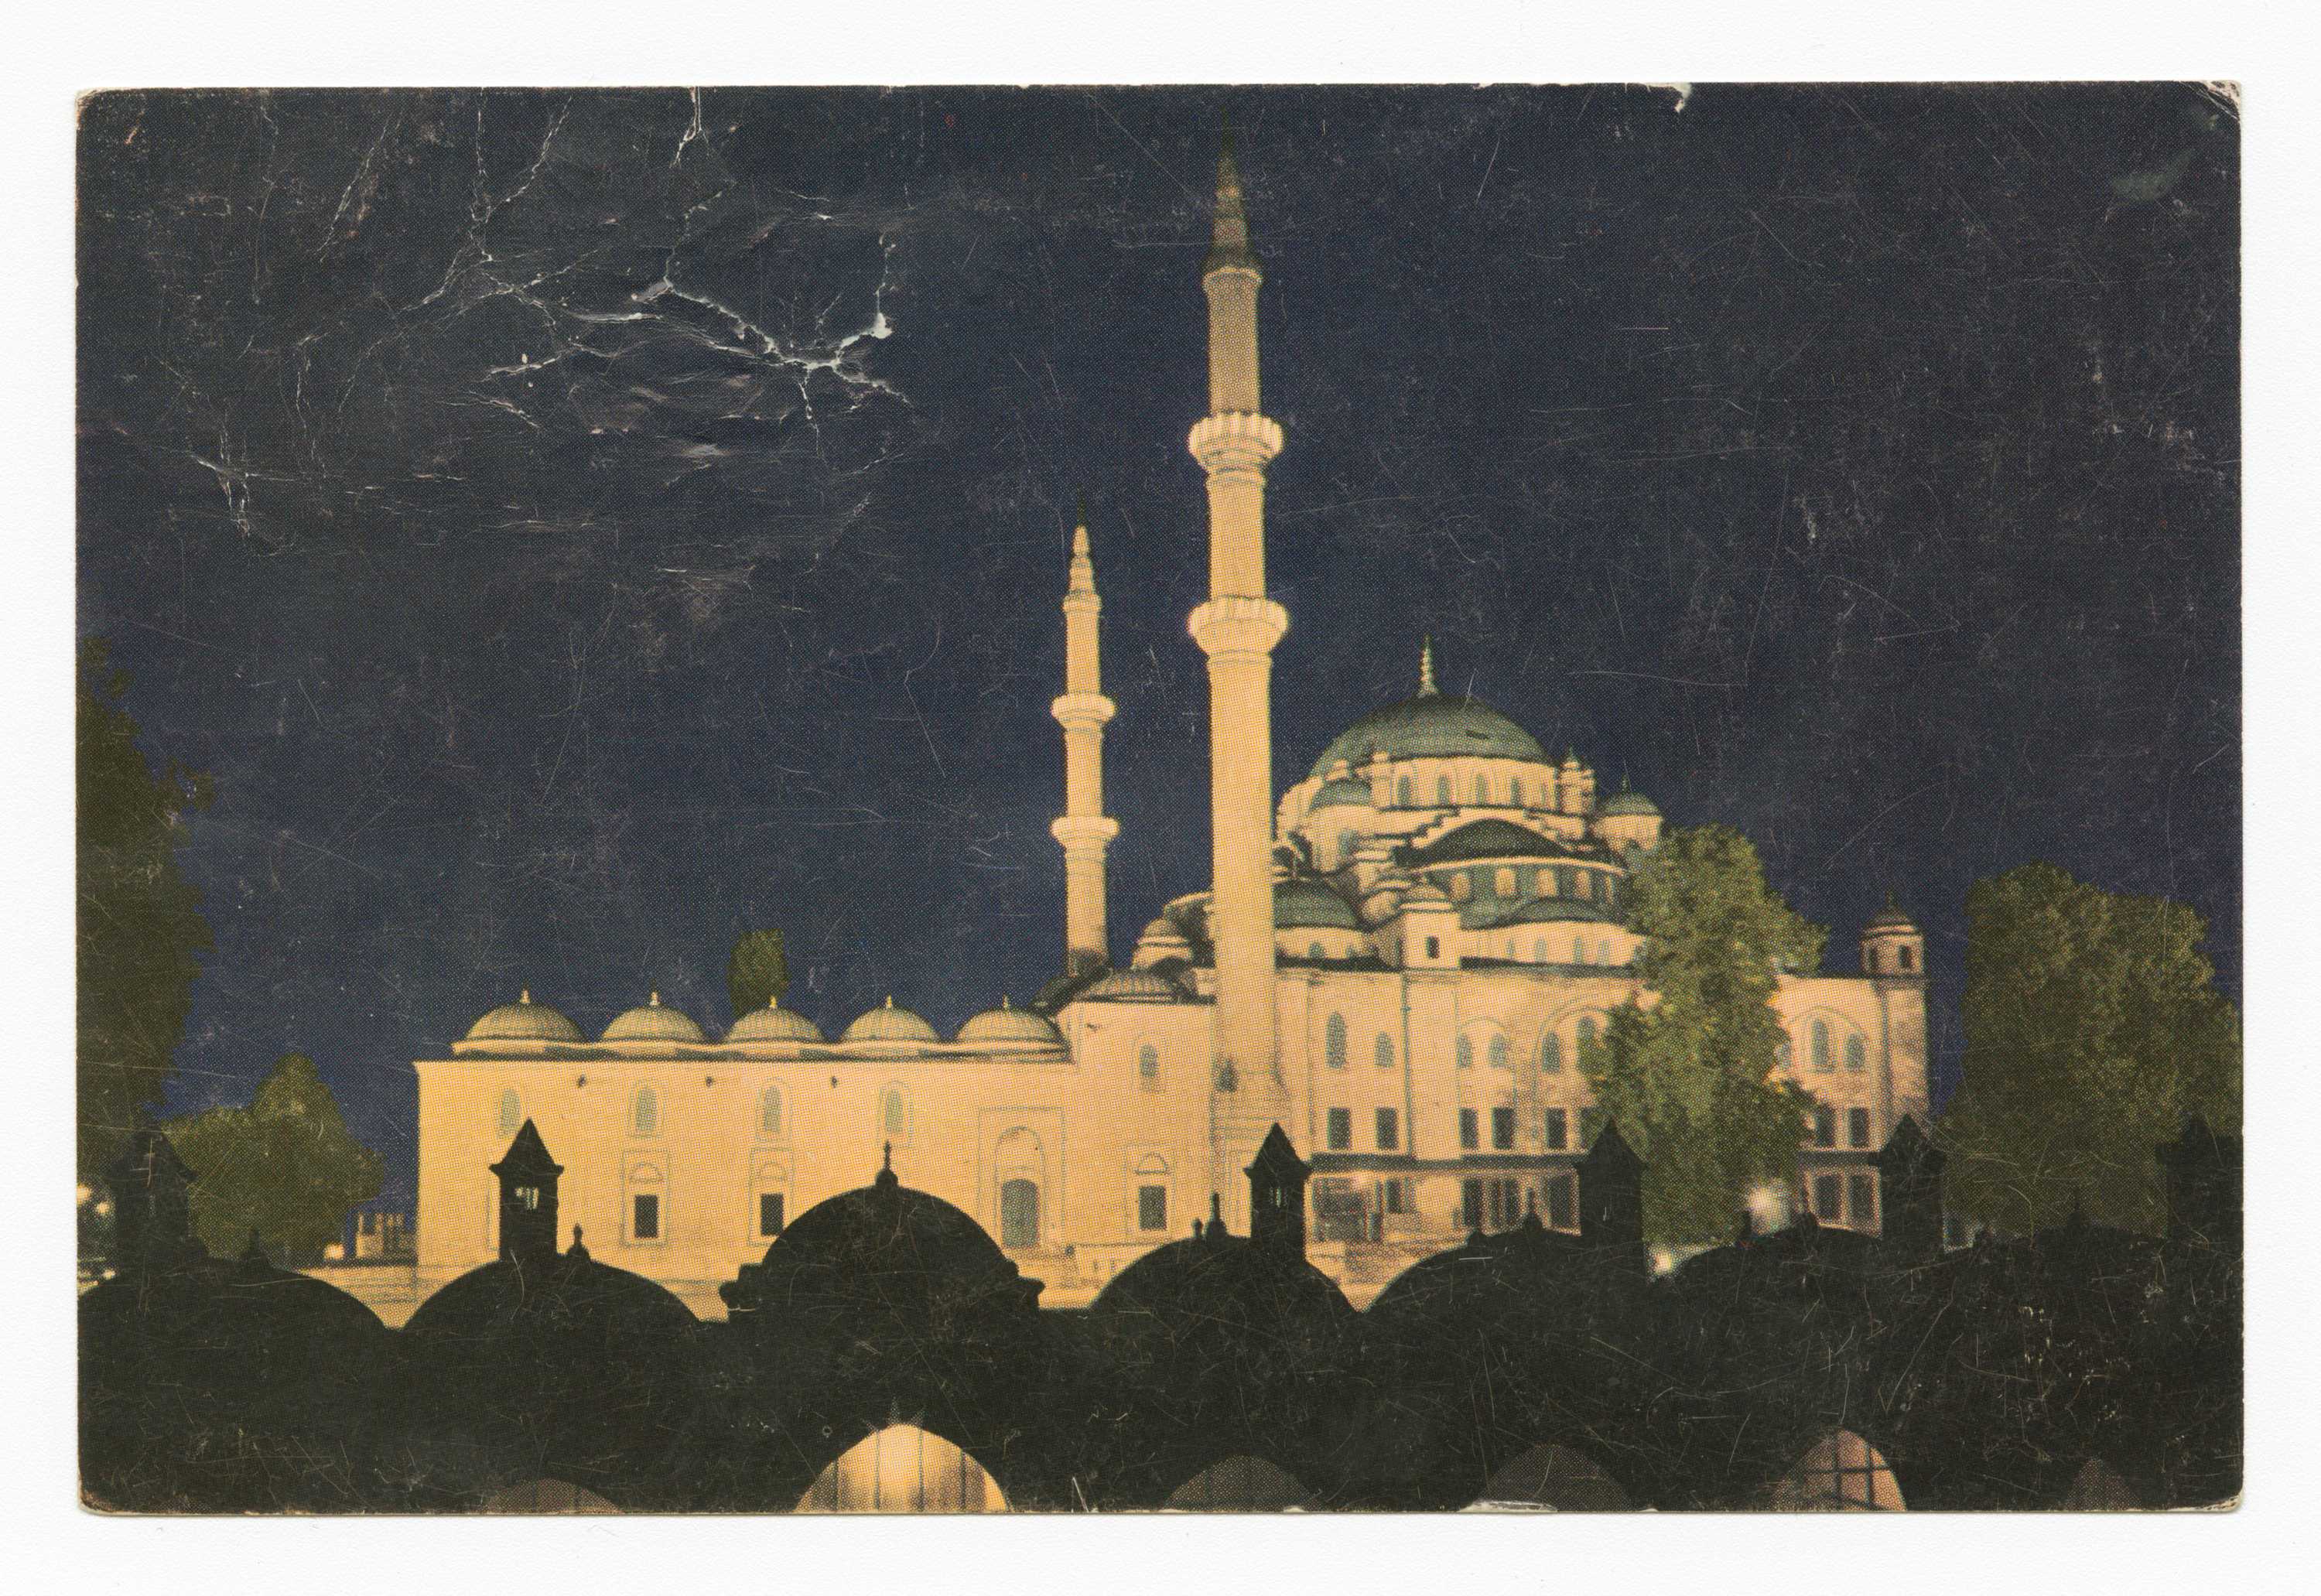 A handwritten postcard from James Baldwin to his sister, Paula Baldwin in which James tells his sister that he has "got some rest, gained some weight, [and is] ready to start again." The front of the postcard depicts the Fatih Mosque in Istanbul.